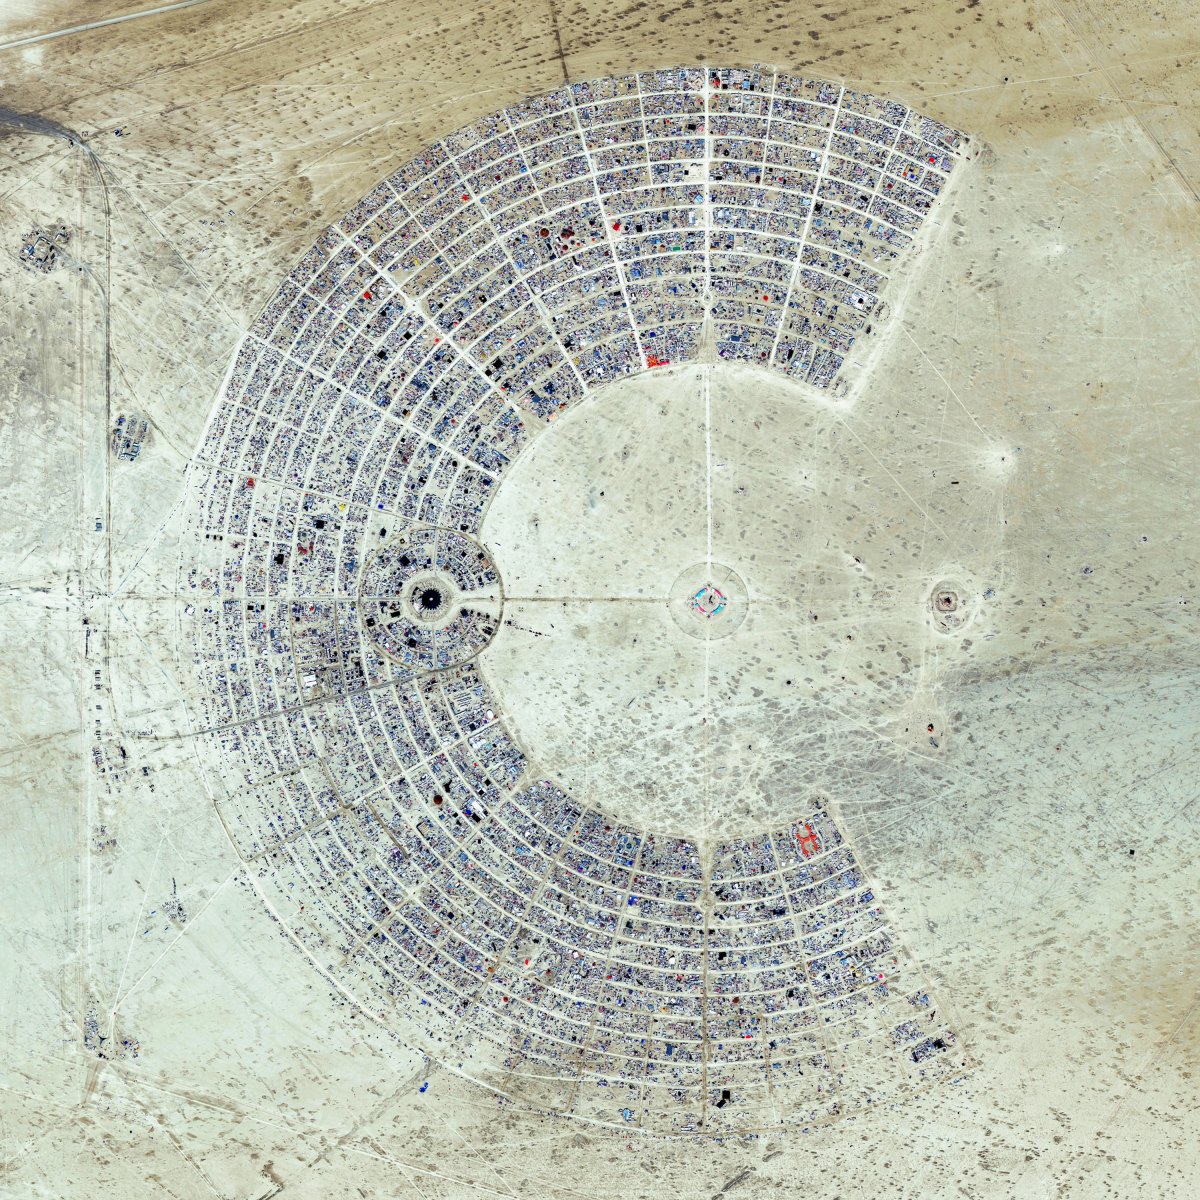 An aerial shot of Burning Man. The weeklong, annual event in Nevada's Black Rock Desert draws more than 65,000 participants, and is described as an experiment in community, art, self-expression and radical self-reliance.